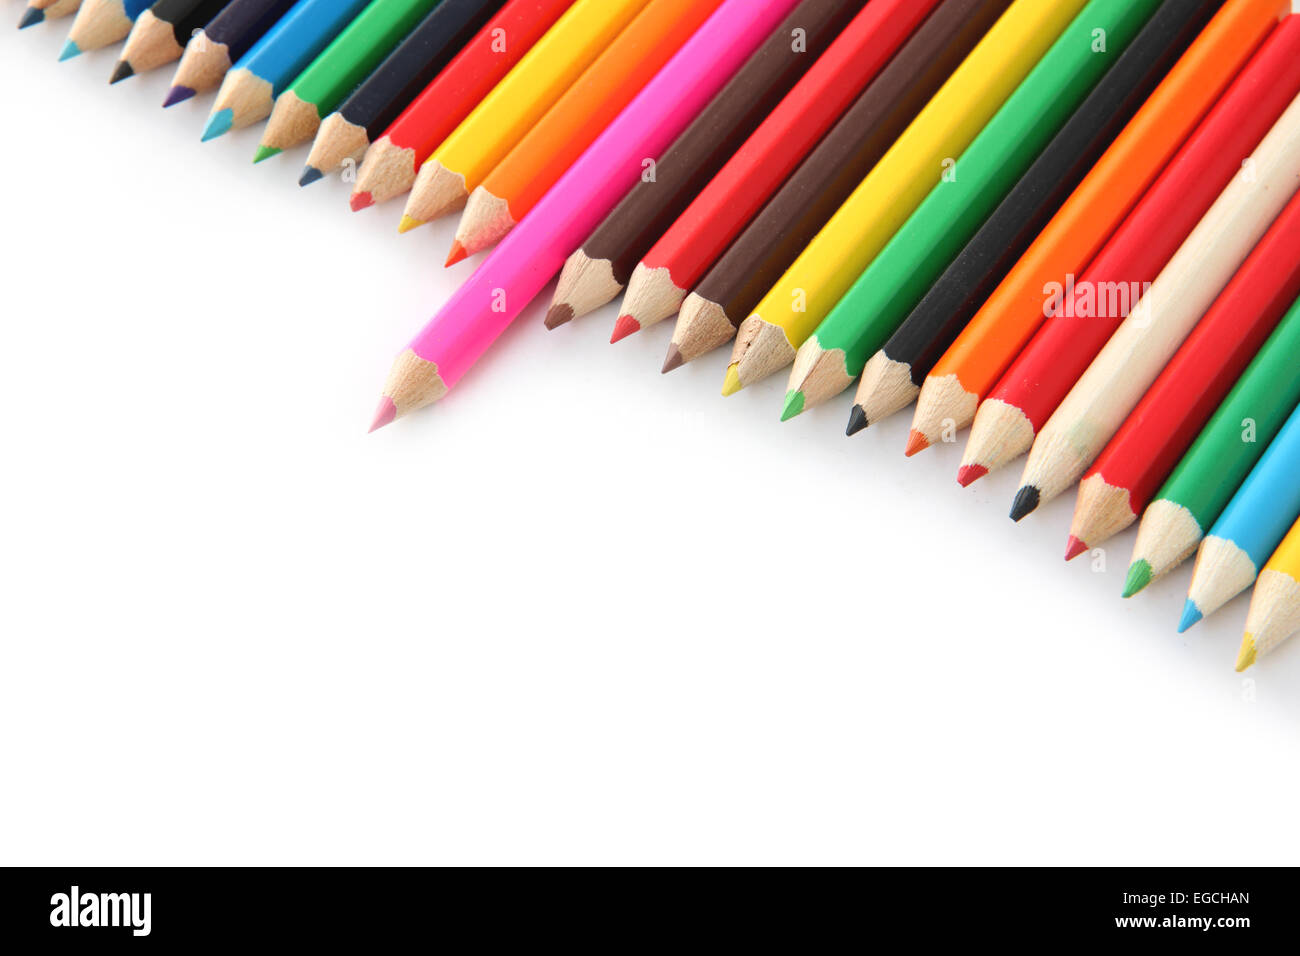 multi colored crayons on a white background. Stock Photo